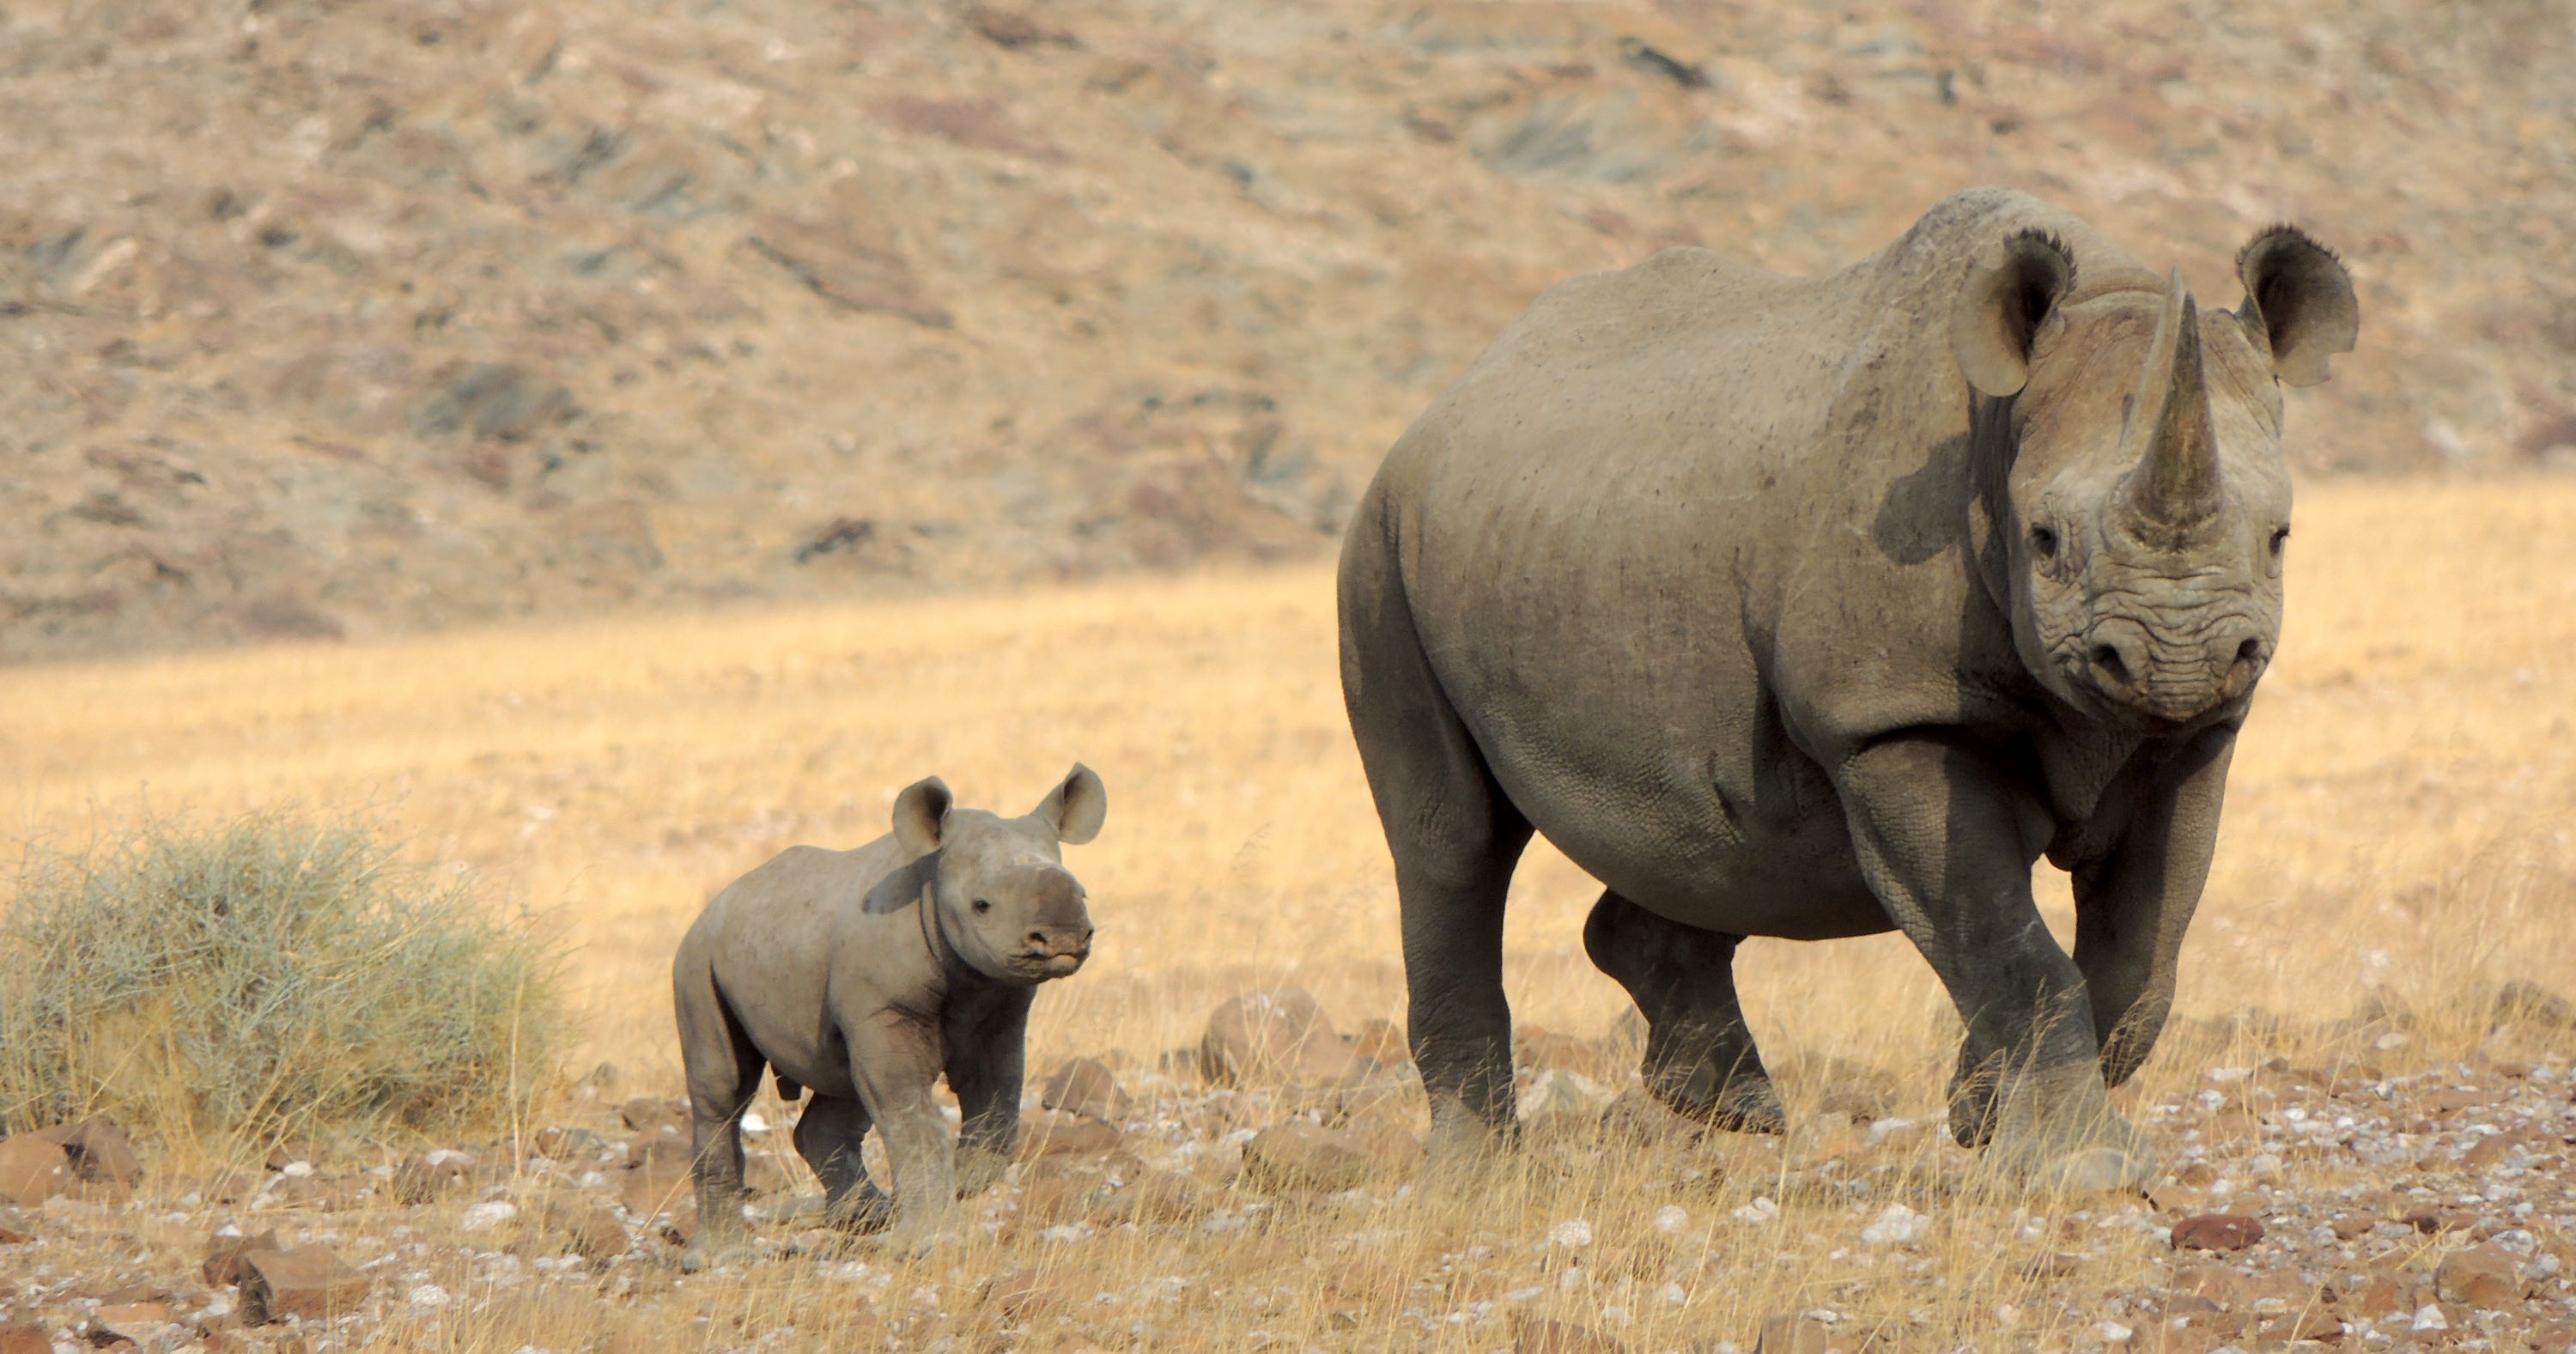 A black rhino mother and calf.